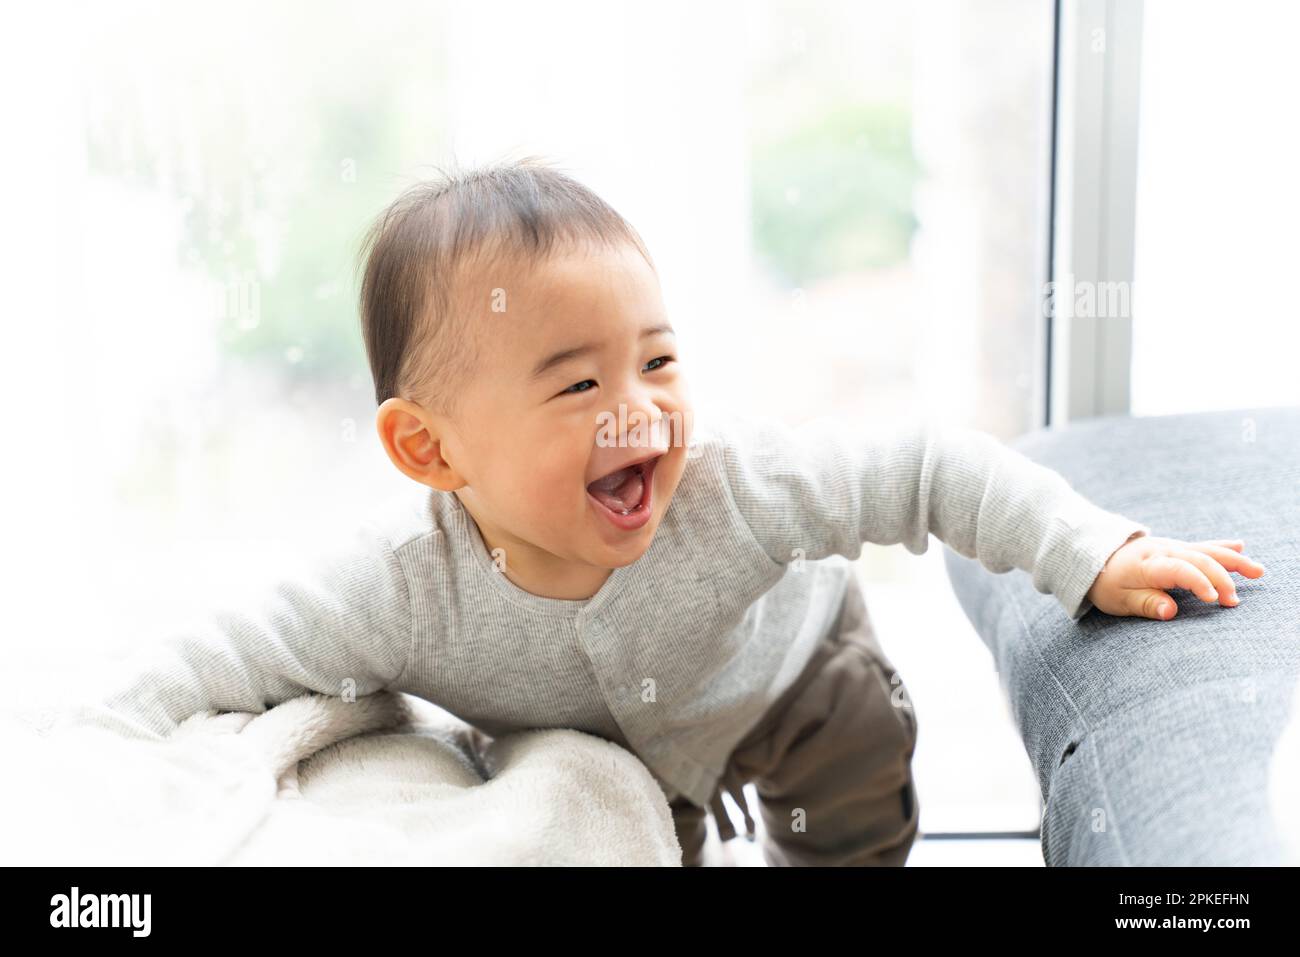 Baby boy laughing in house Stock Photo